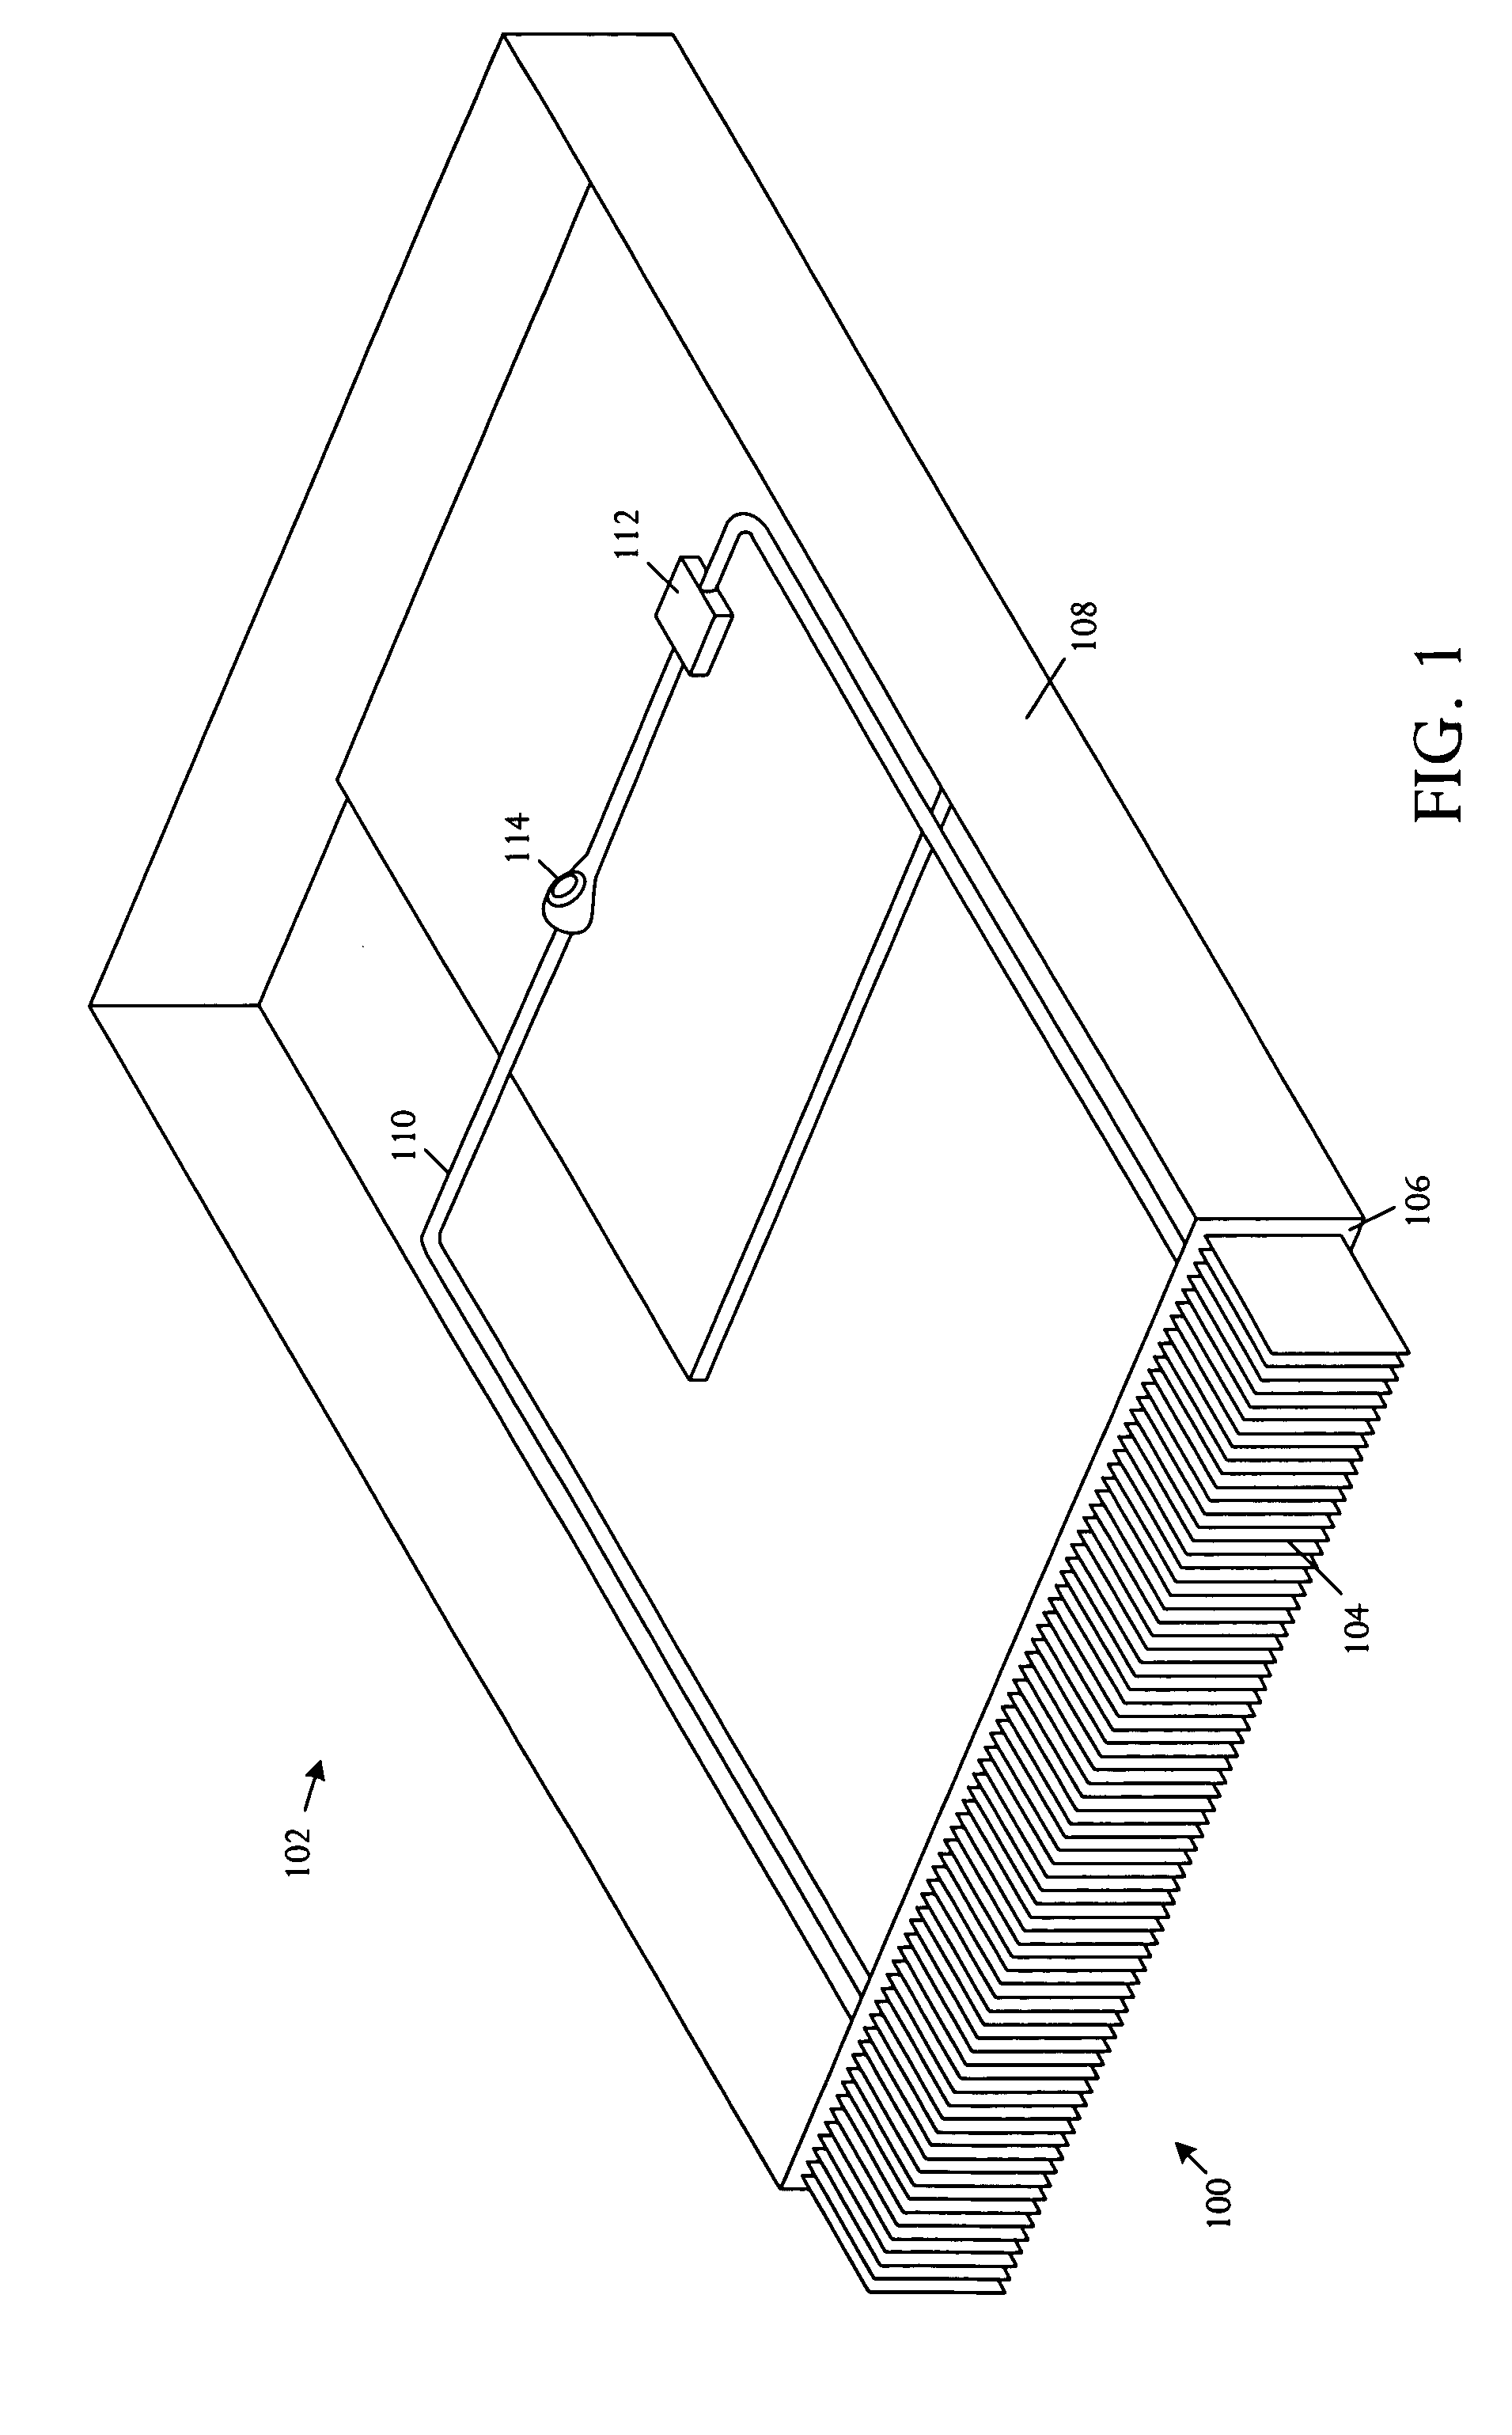 External liquid loop heat exchanger for an electronic system